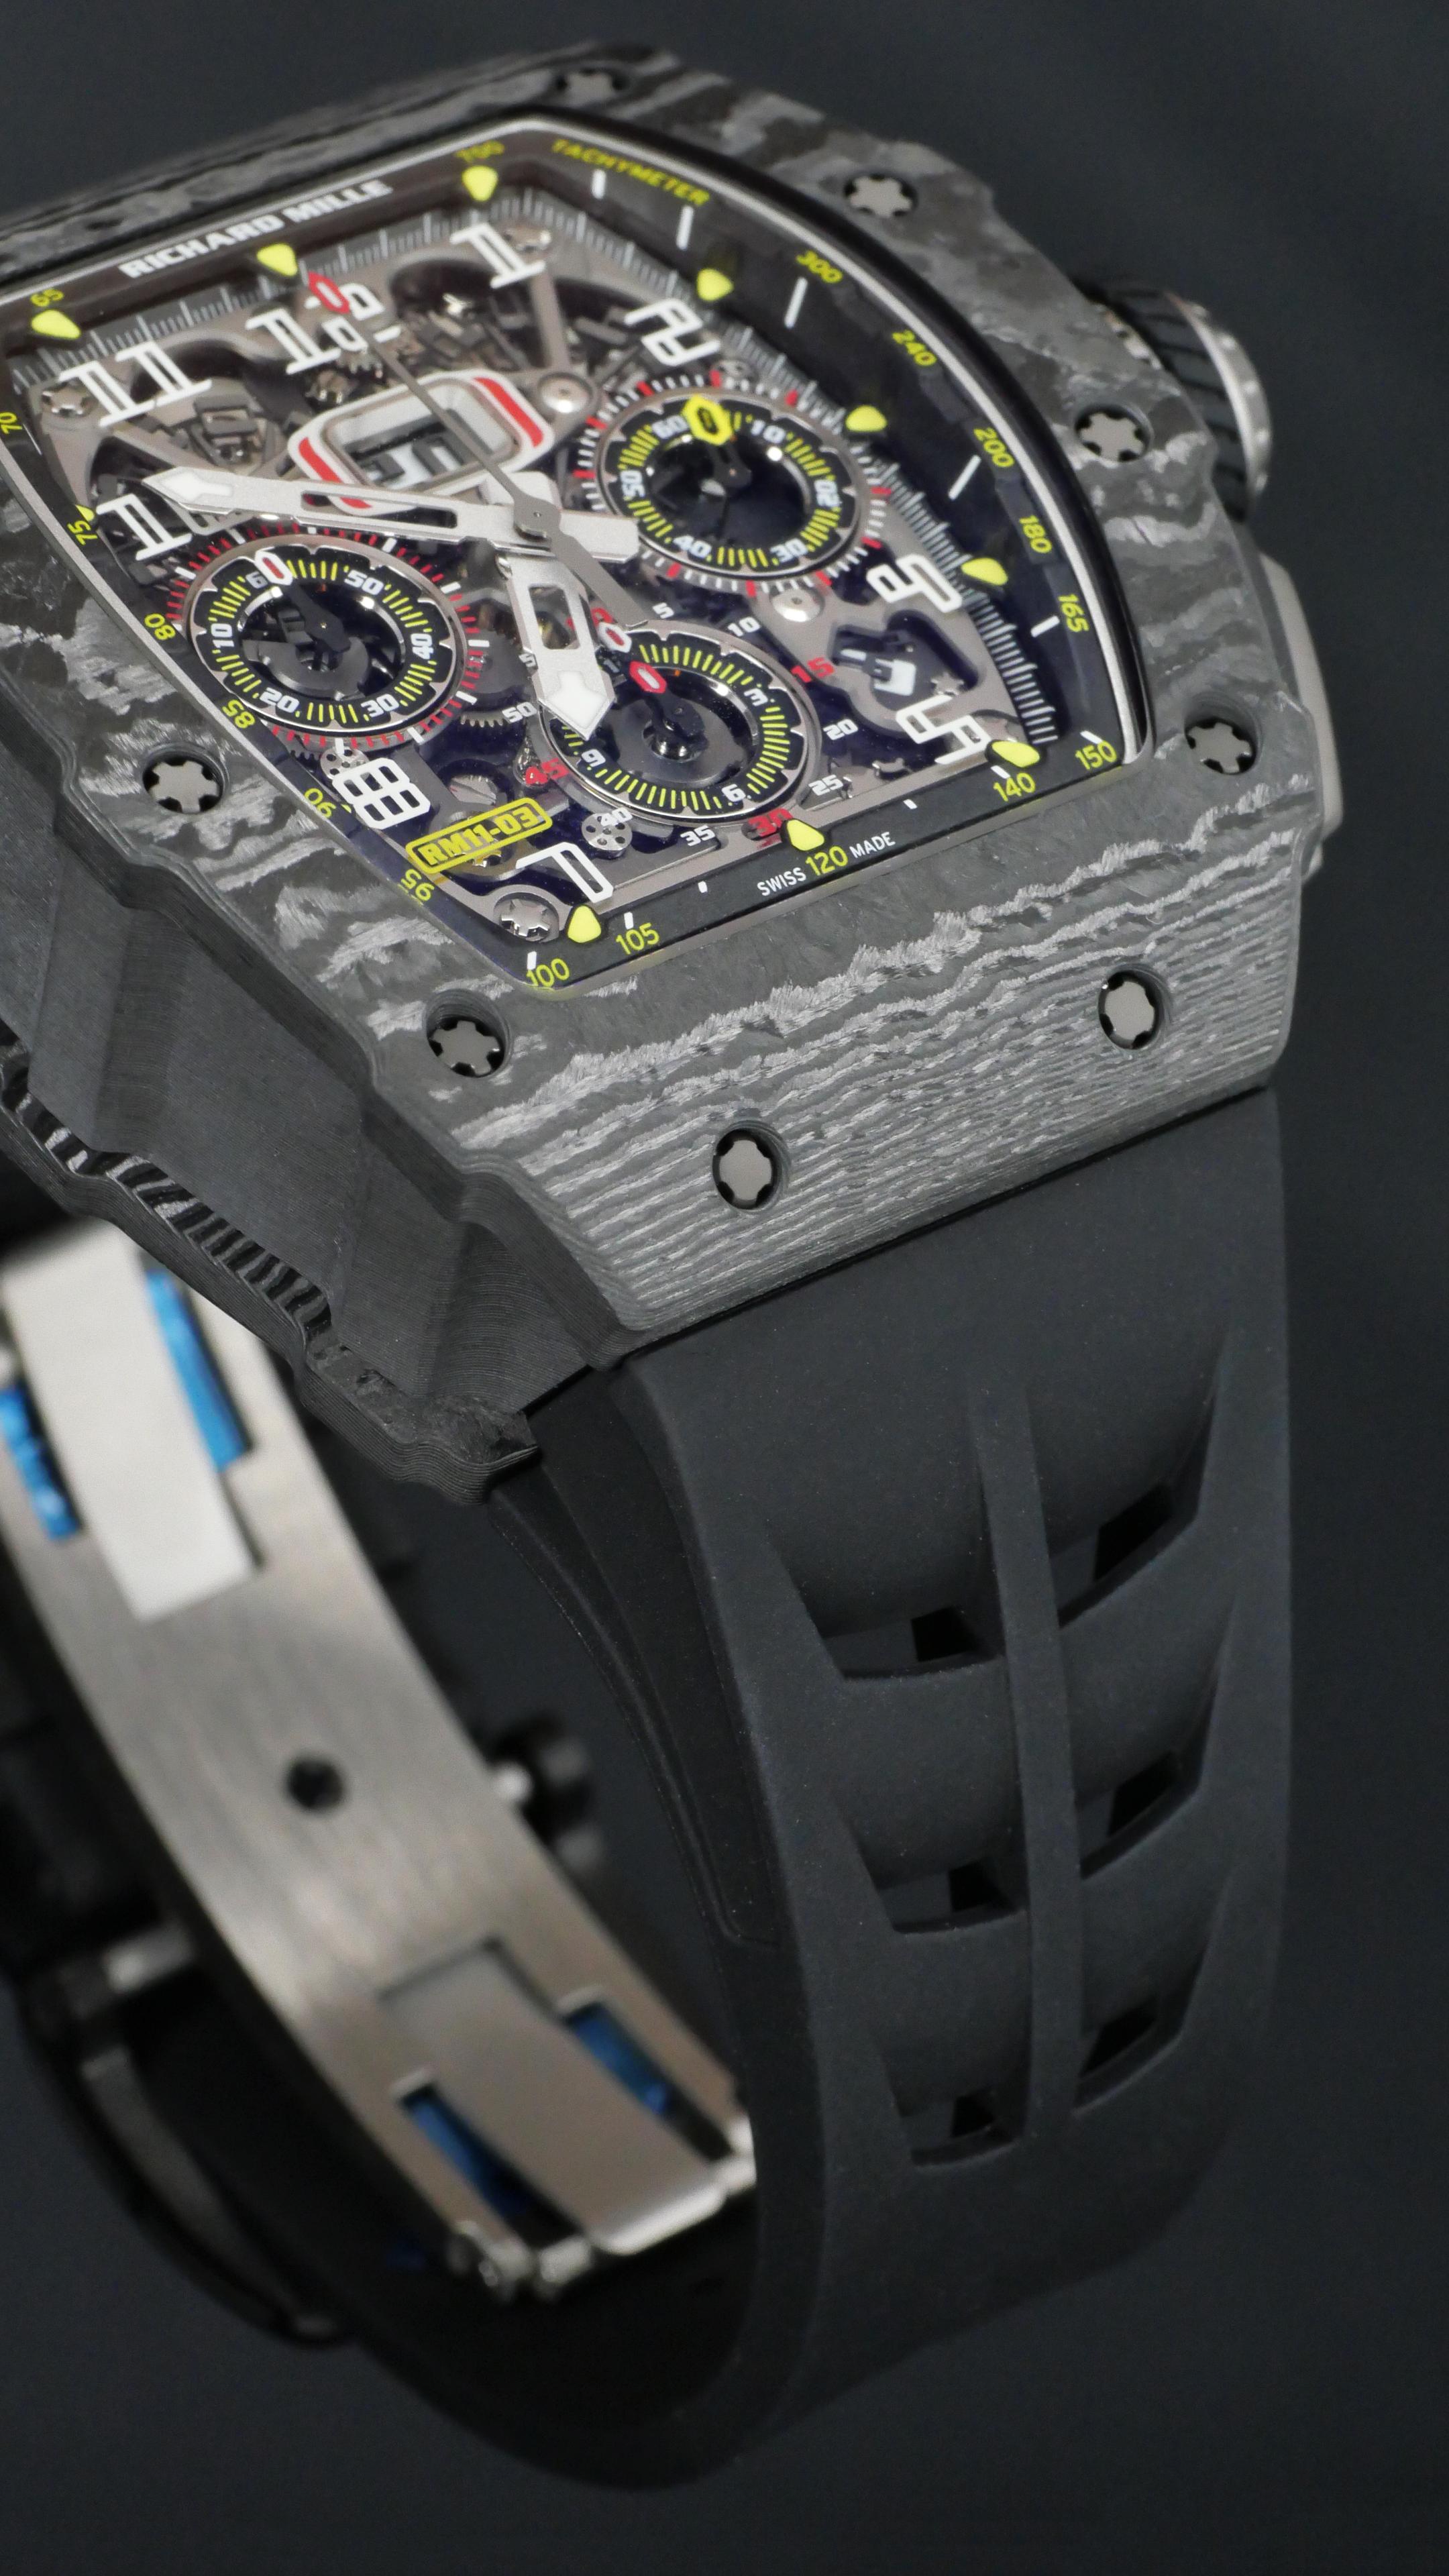 Richard Mille RM 011-03 Flyback Chronograph Automatic Wristwatch For Sale 7